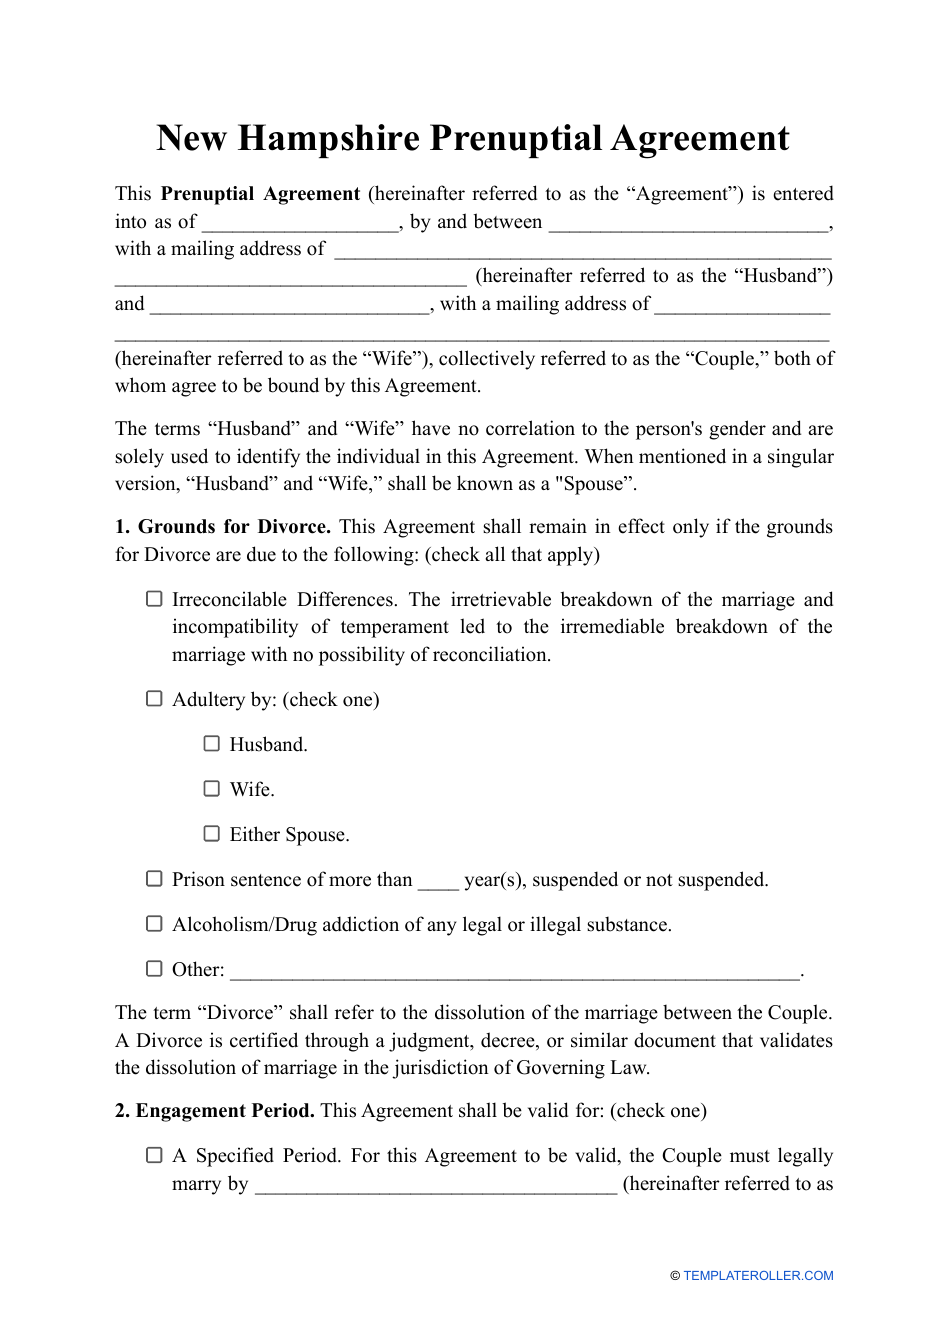 Prenuptial Agreement Template - New Hampshire, Page 1